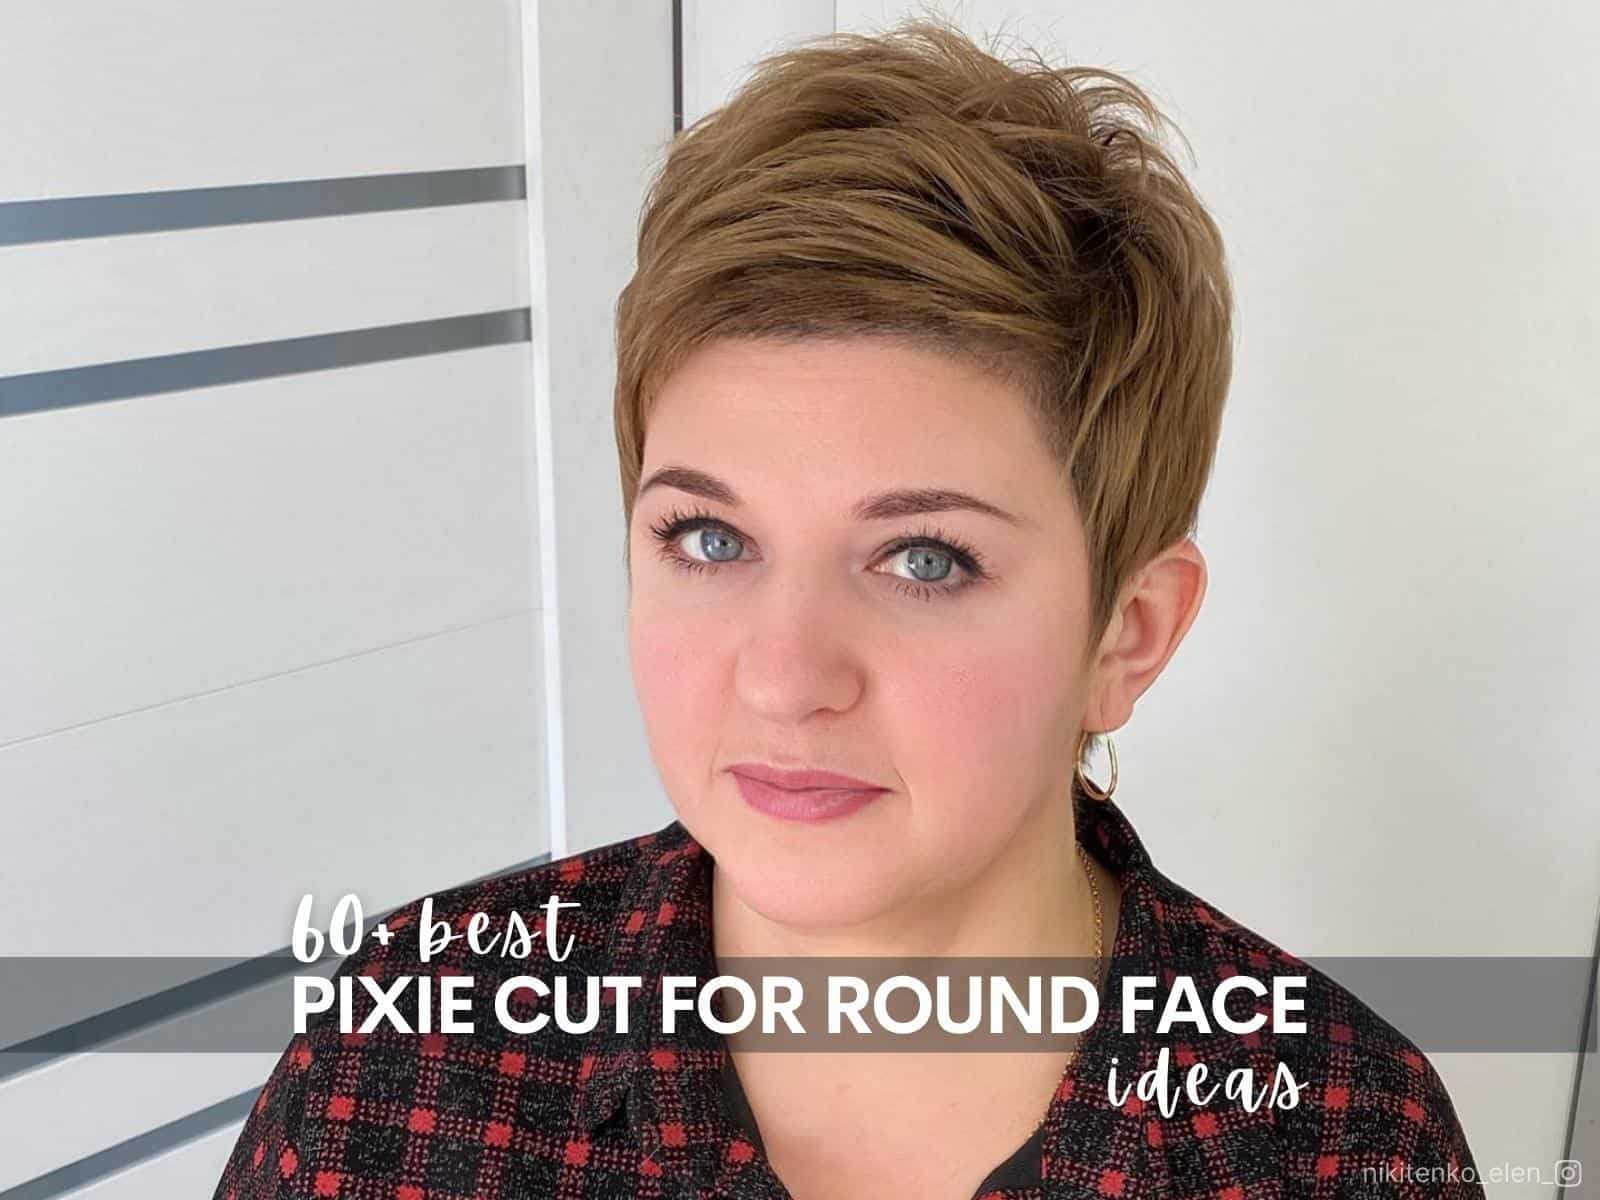 60+ Best Pixie Cut For Round Face Ideas